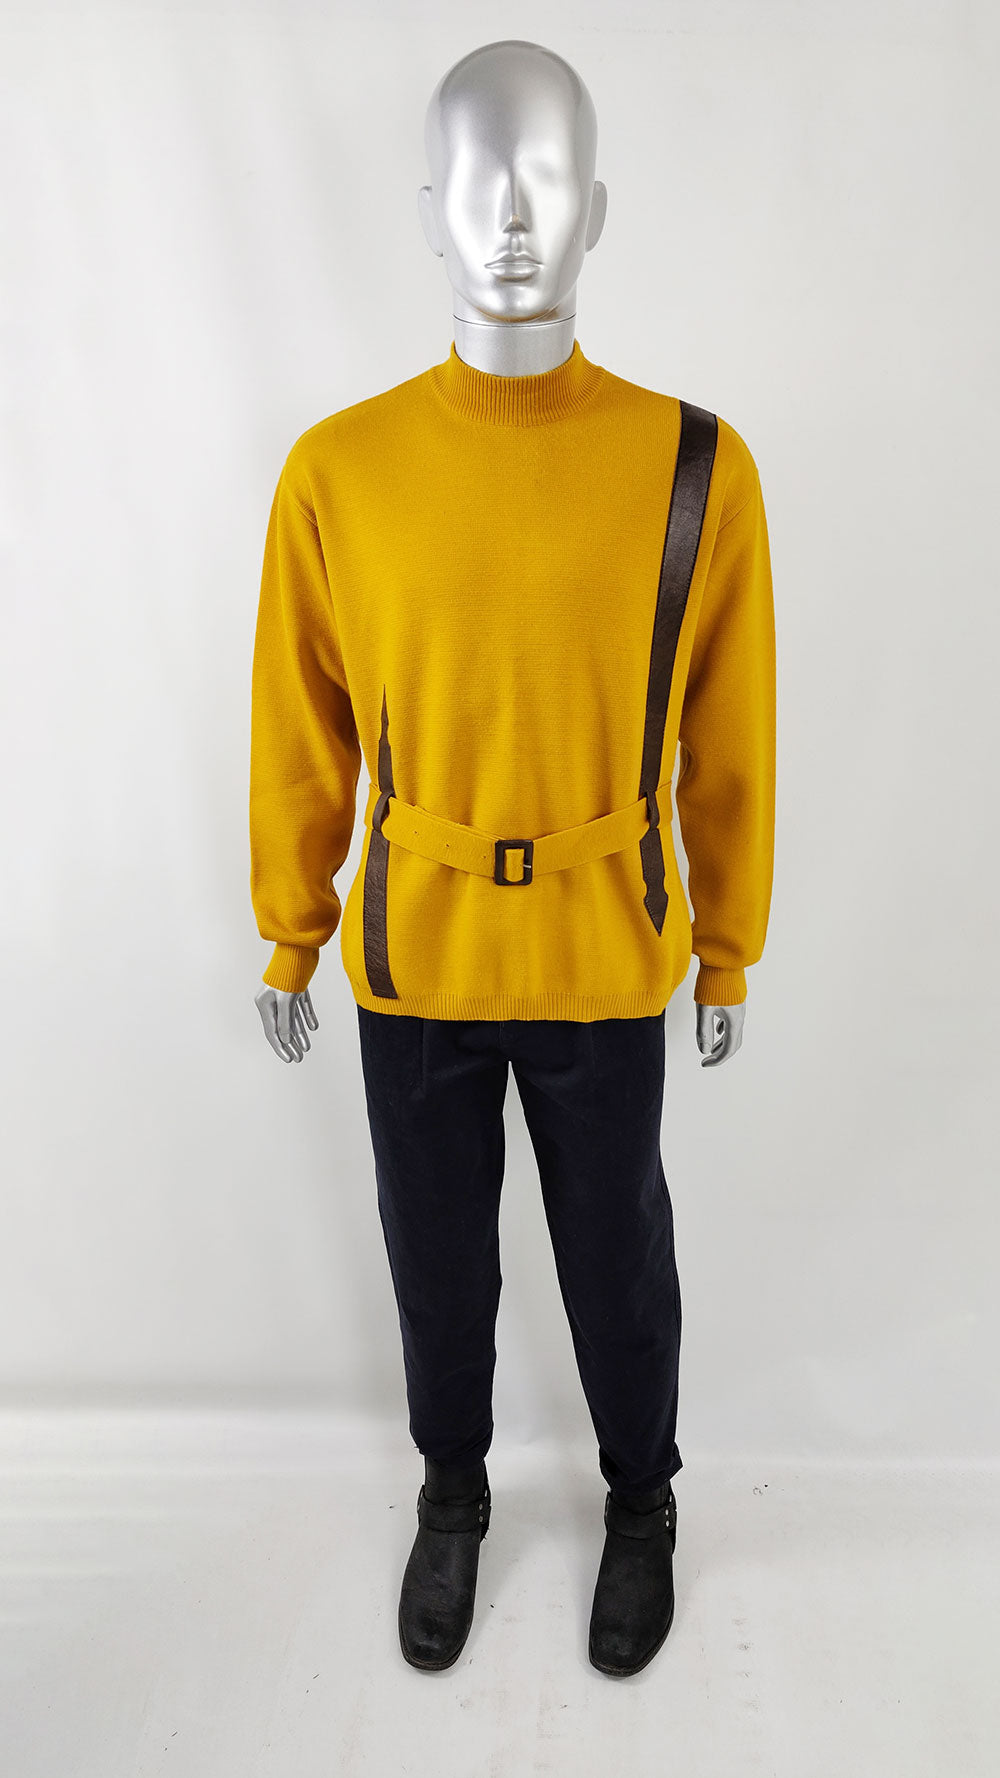 Unique vintage jumper with a futuristic, space-age look. Made by Harrods for their menswear label, "Man's Shop."